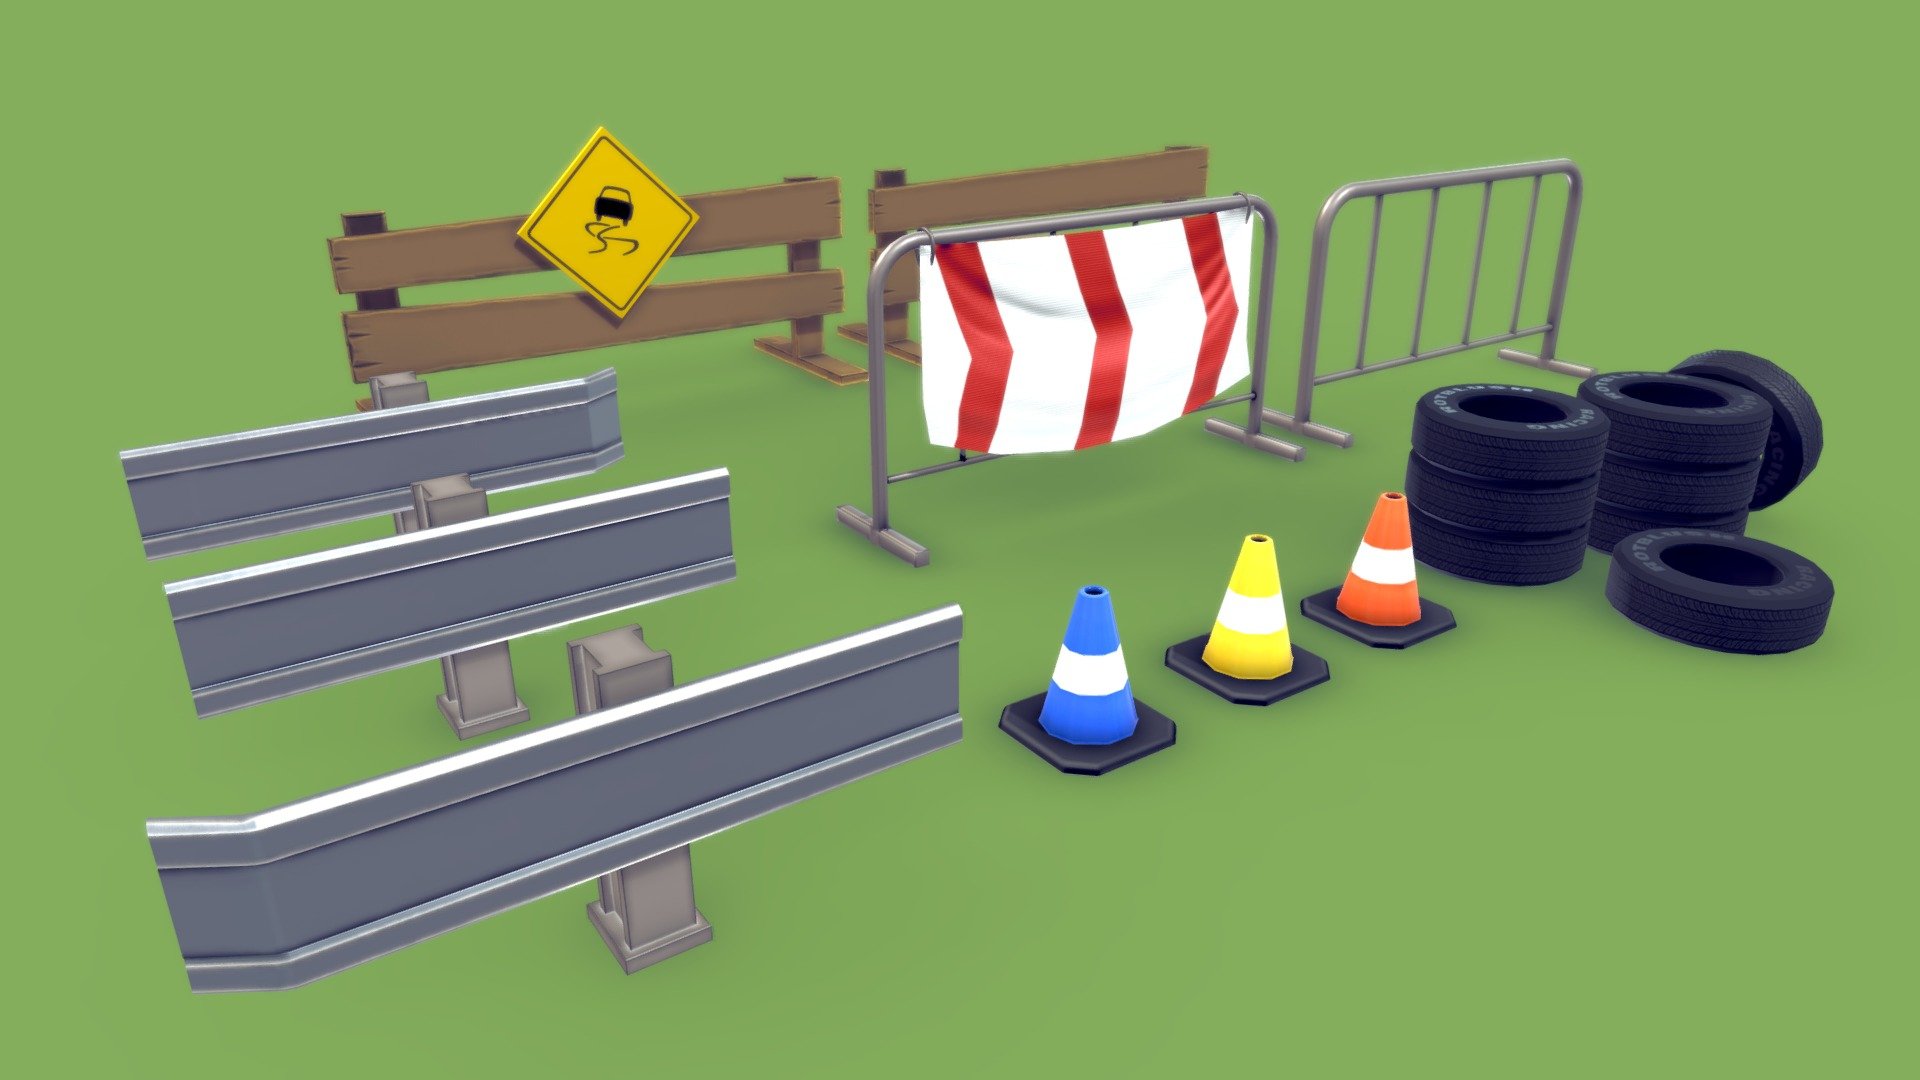 Get your car-racing game ready with this stylized car race props!
Optimized for PC and mobile games. Compatible and tested in Unreal Engine 4.


This bundle includes:



2 variations of wooden fences

2 variations of metal barriers

1 Traffic cone with 3 texture variations

1 single tire mesh

2 variations of tire pile mesh

3 rail guard mesh

Stylized PBR
2k texture maps

Inquiries and support: https://deulloa.art/contact - Car Game Props - Bundle - Buy Royalty Free 3D model by rotblush 3d model